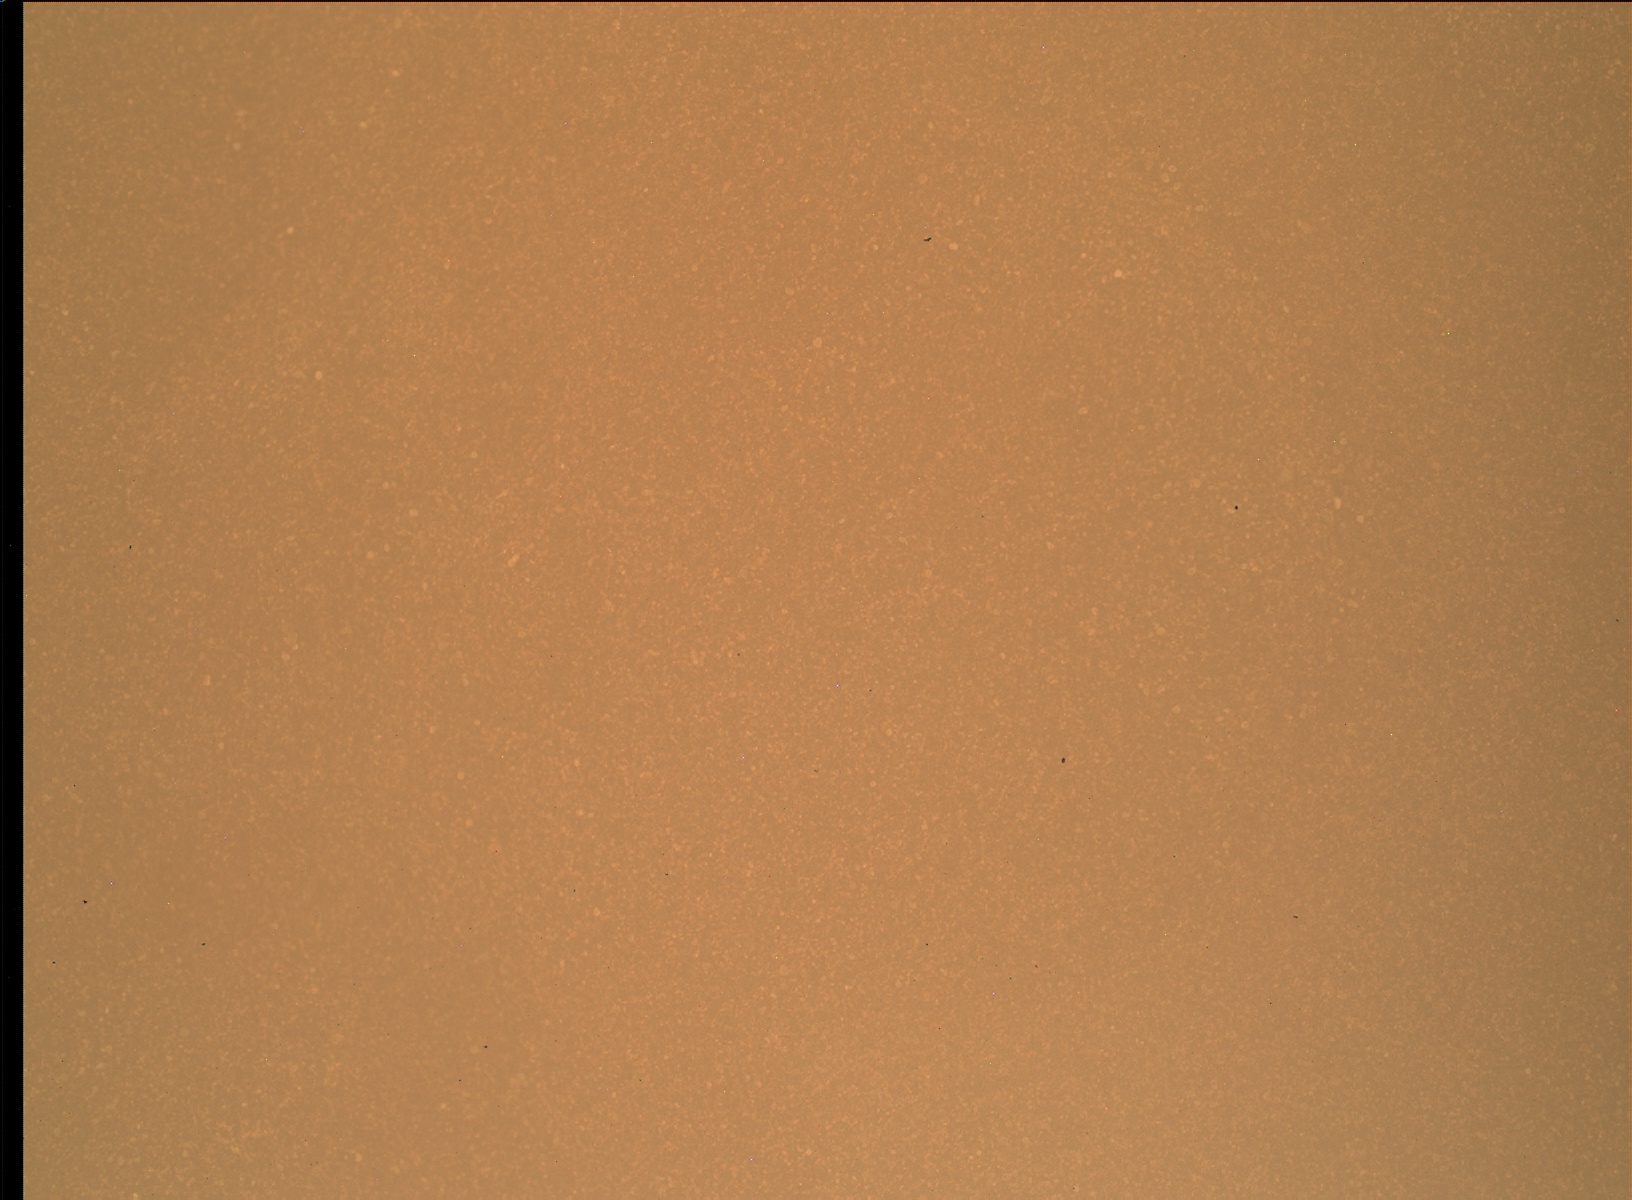 Nasa's Mars rover Curiosity acquired this image using its Mars Hand Lens Imager (MAHLI) on Sol 1639